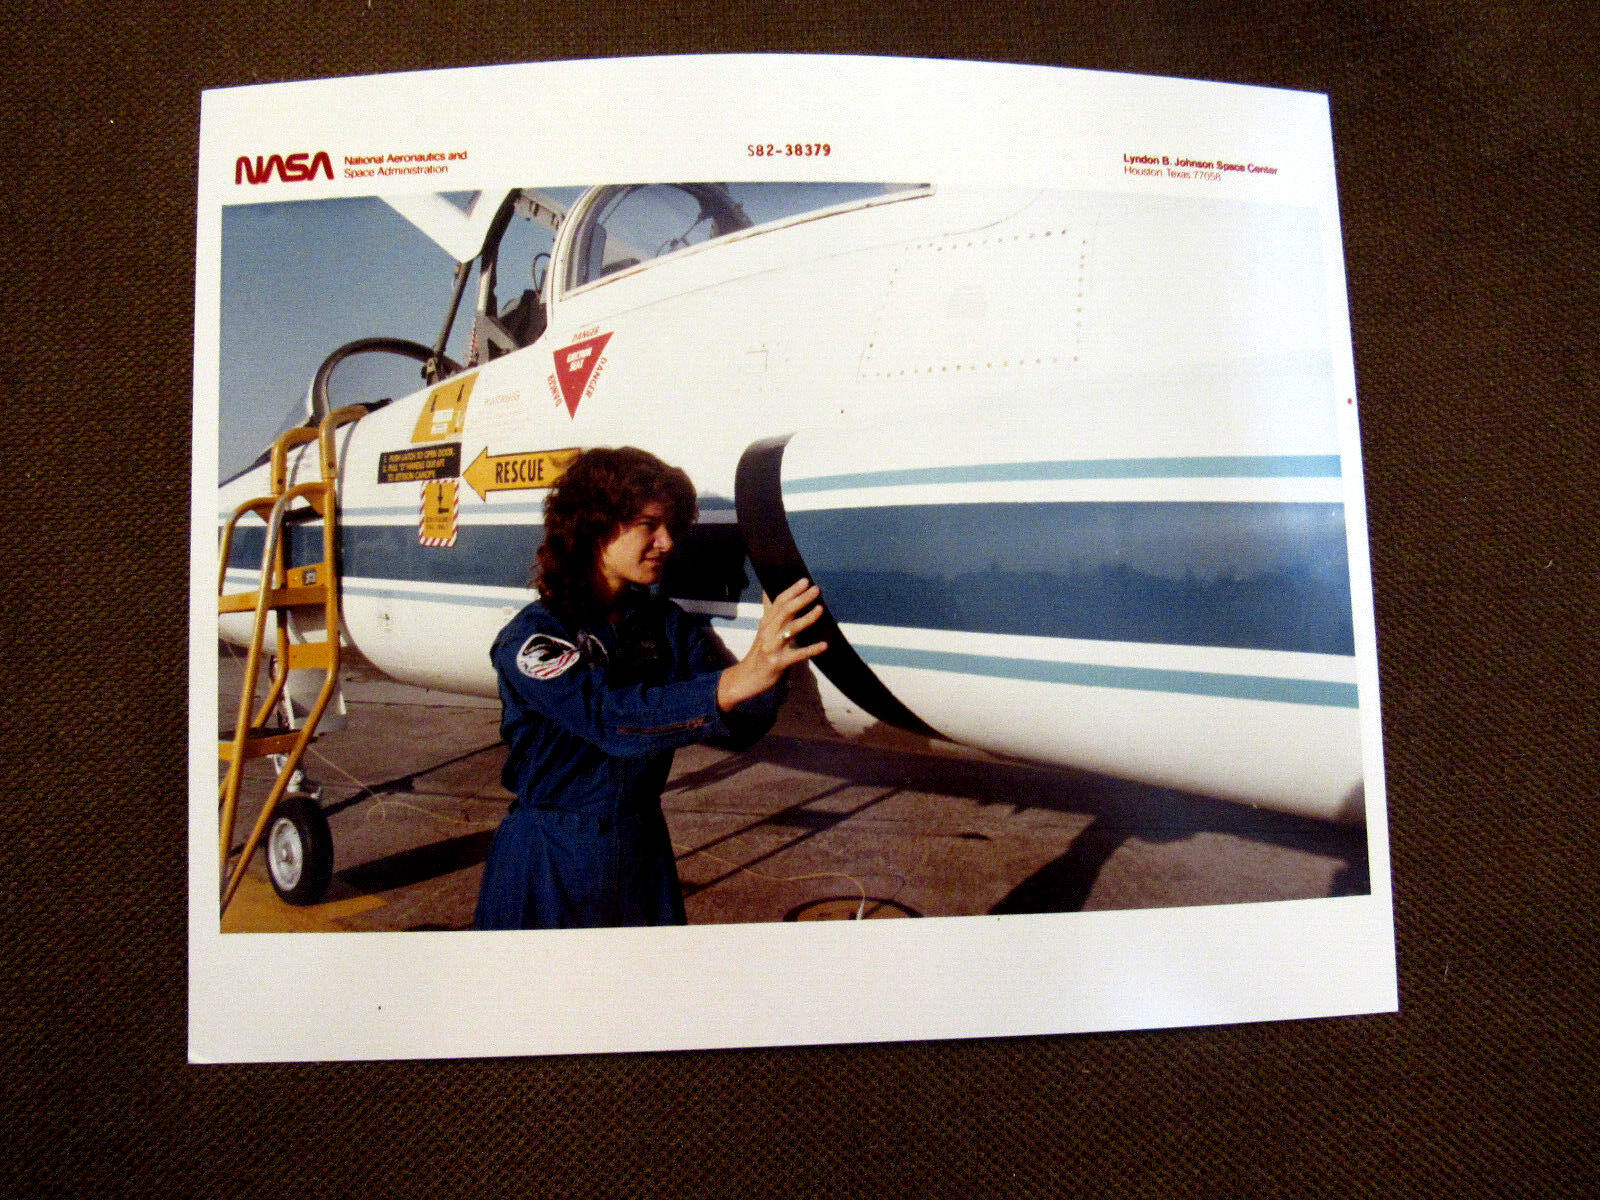 SALLY RIDE NASA ASTRONAUT KODAK RED SERIAL STS-7 MISSION CHECKS OVER T-30 LITHO